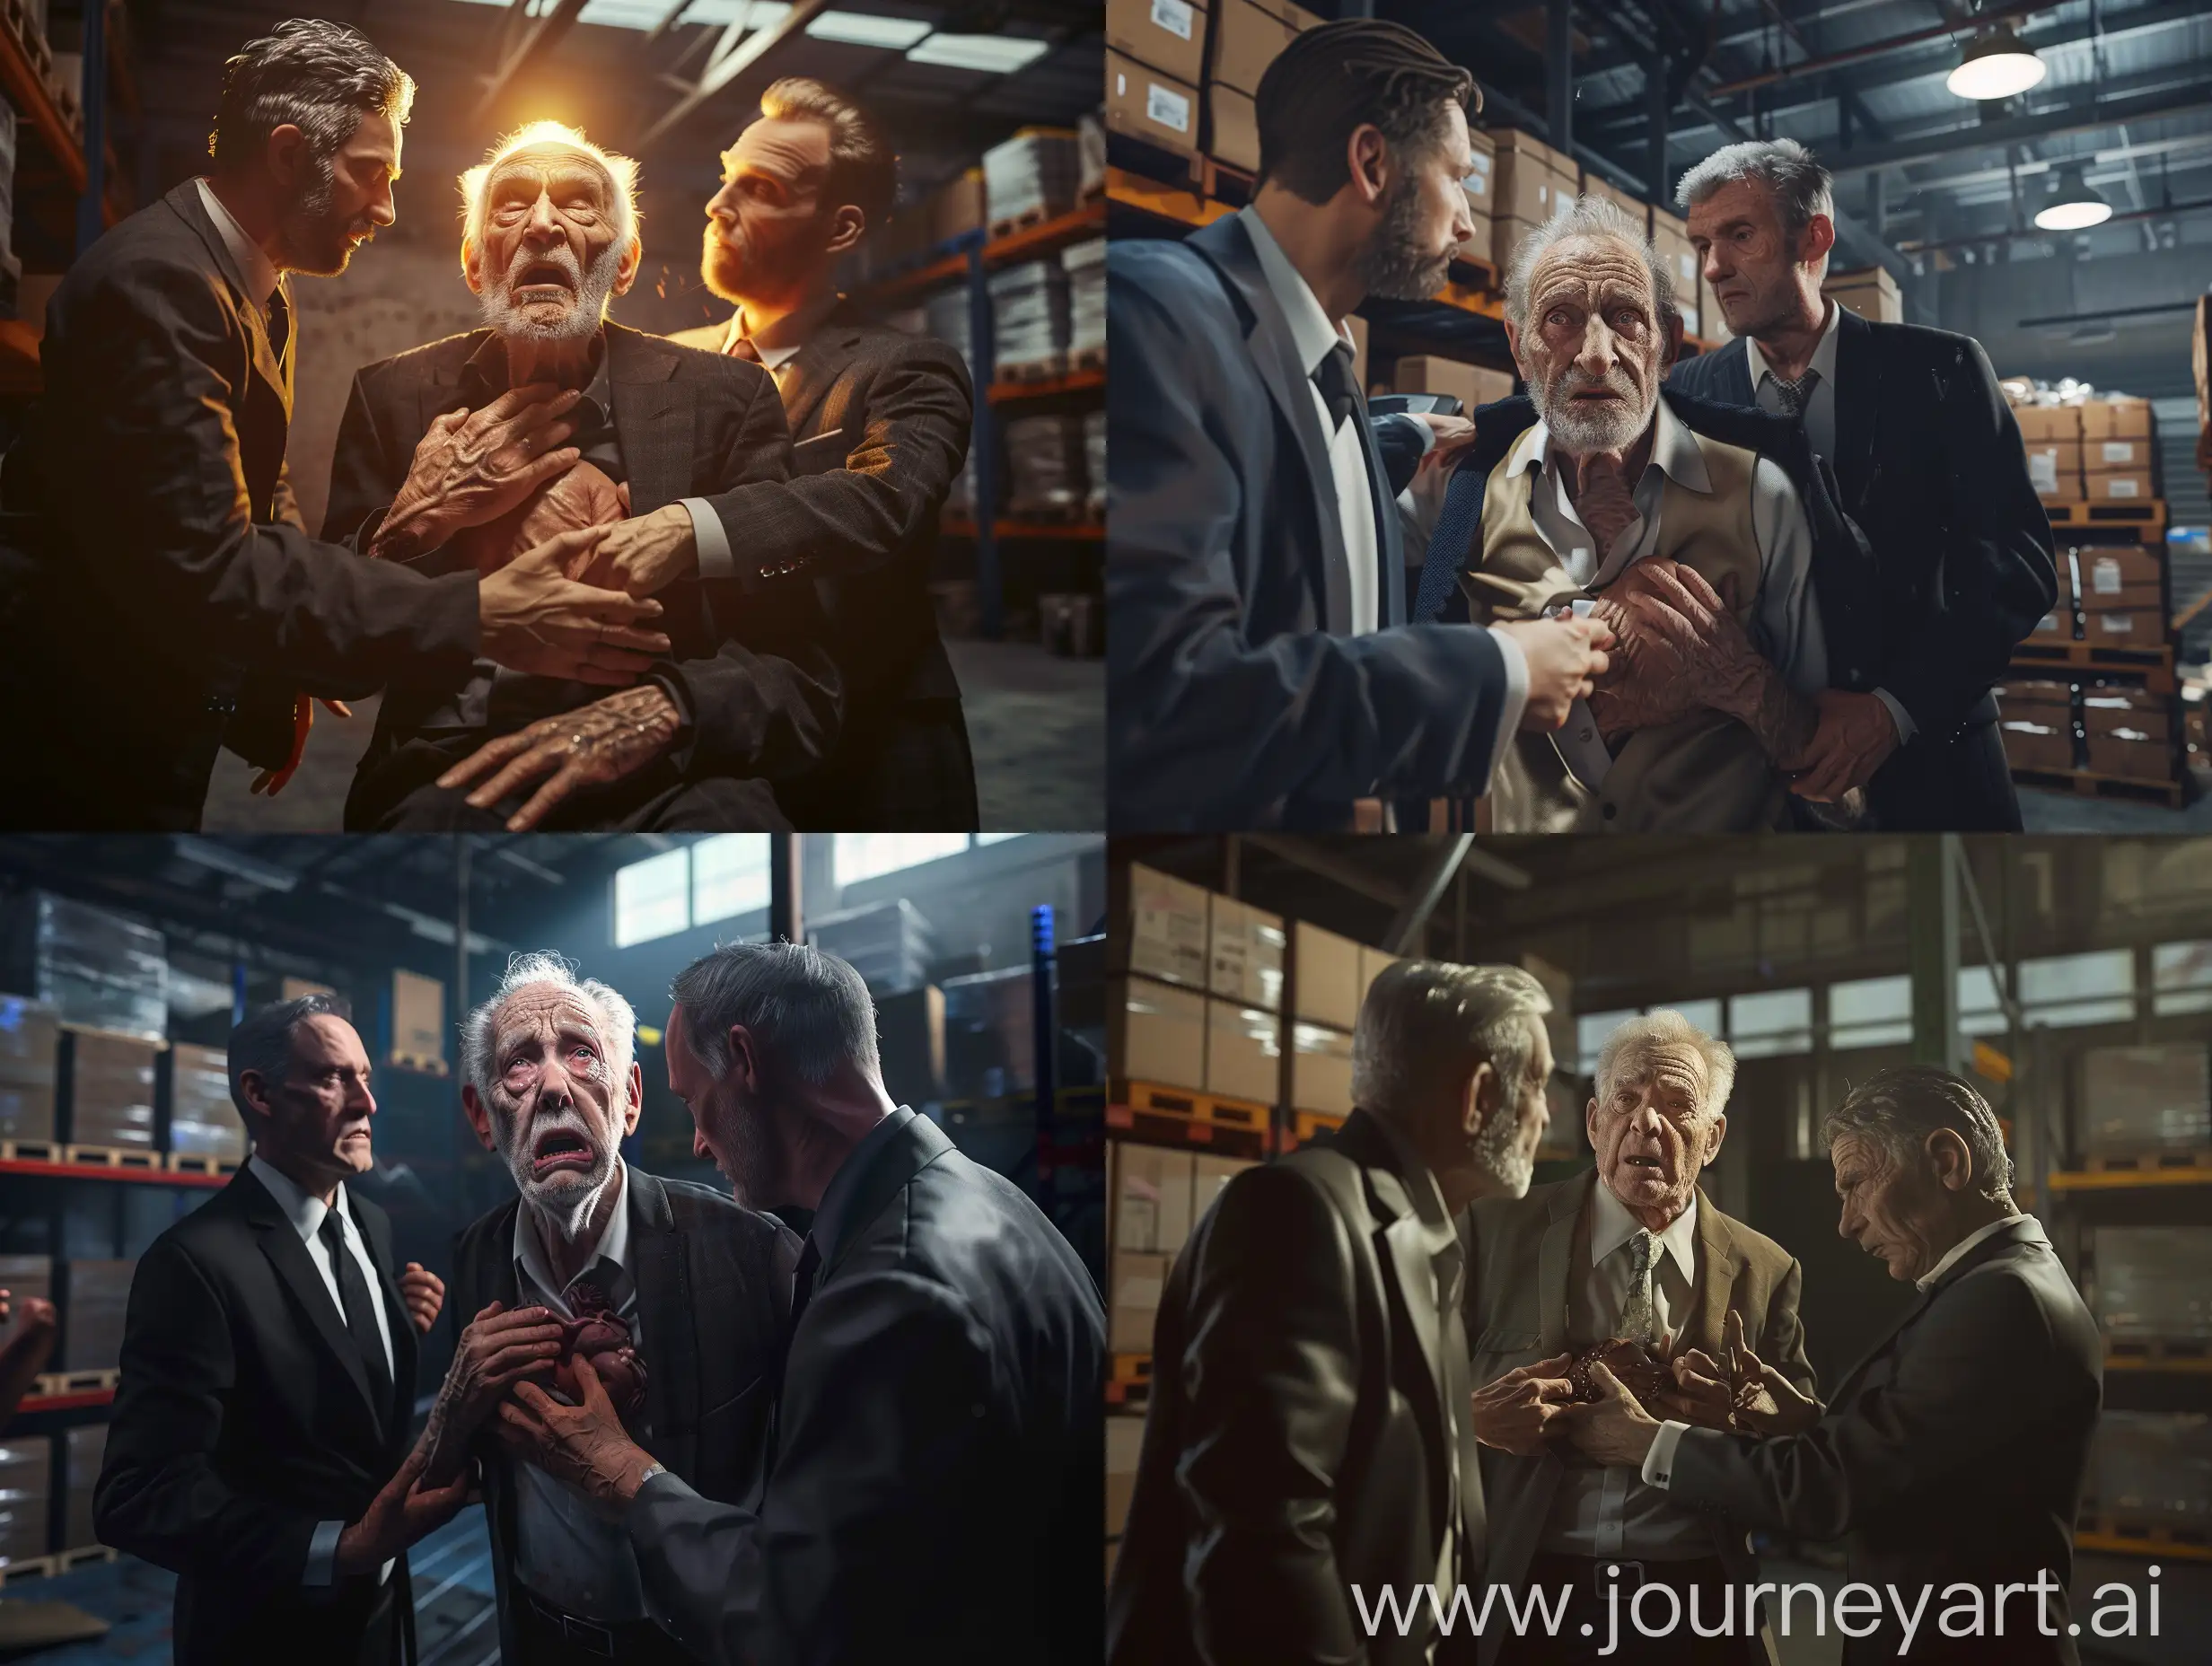 photo-realistic,an old man in a warehouse has a heart attack as two men in suits try to help him,atmospheric lighting 